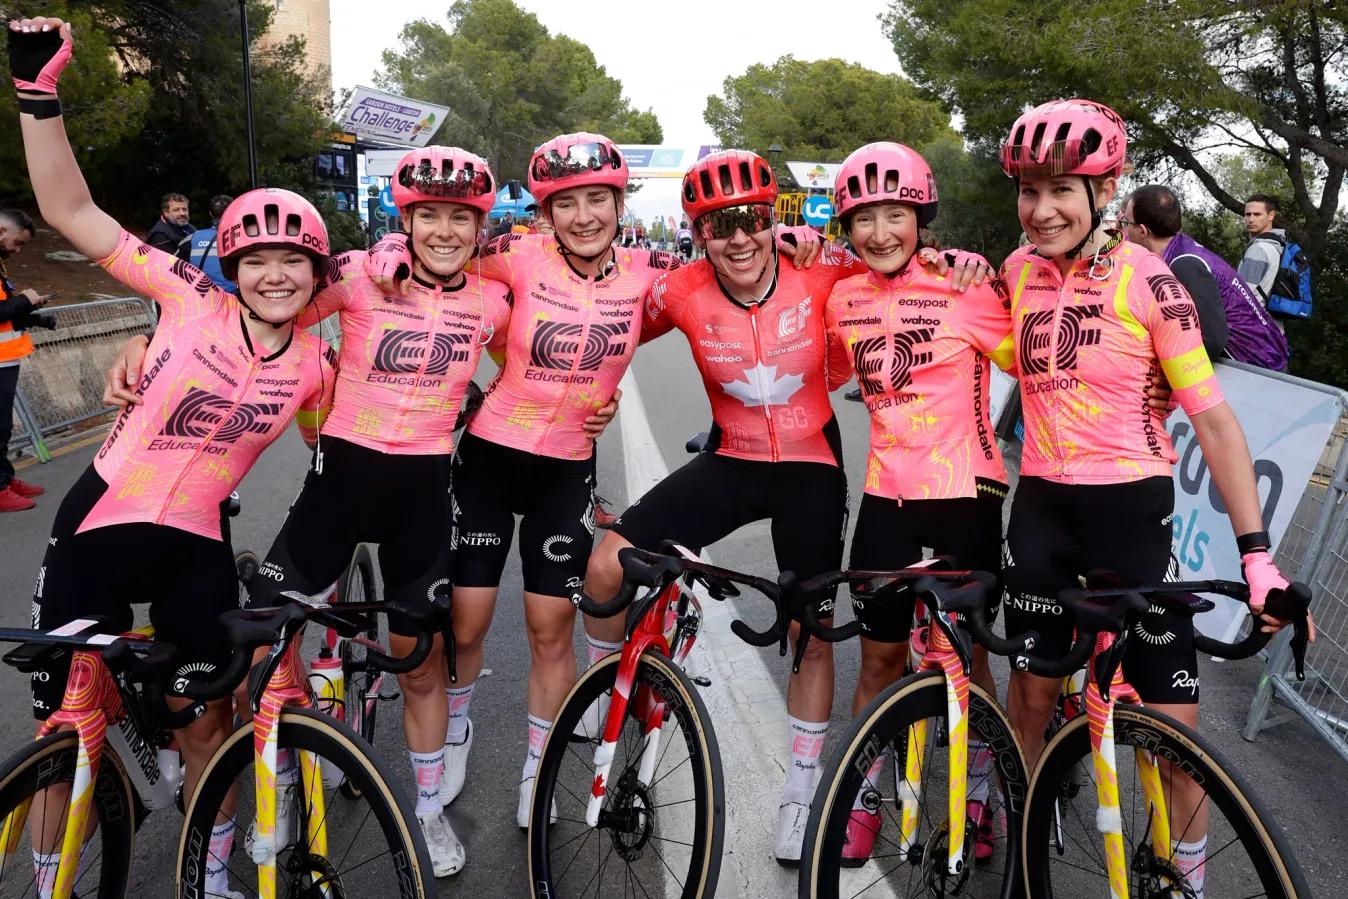 The helmet has already been used to great success by EF Education-Cannondale at the recent Trofeo Palma Femina